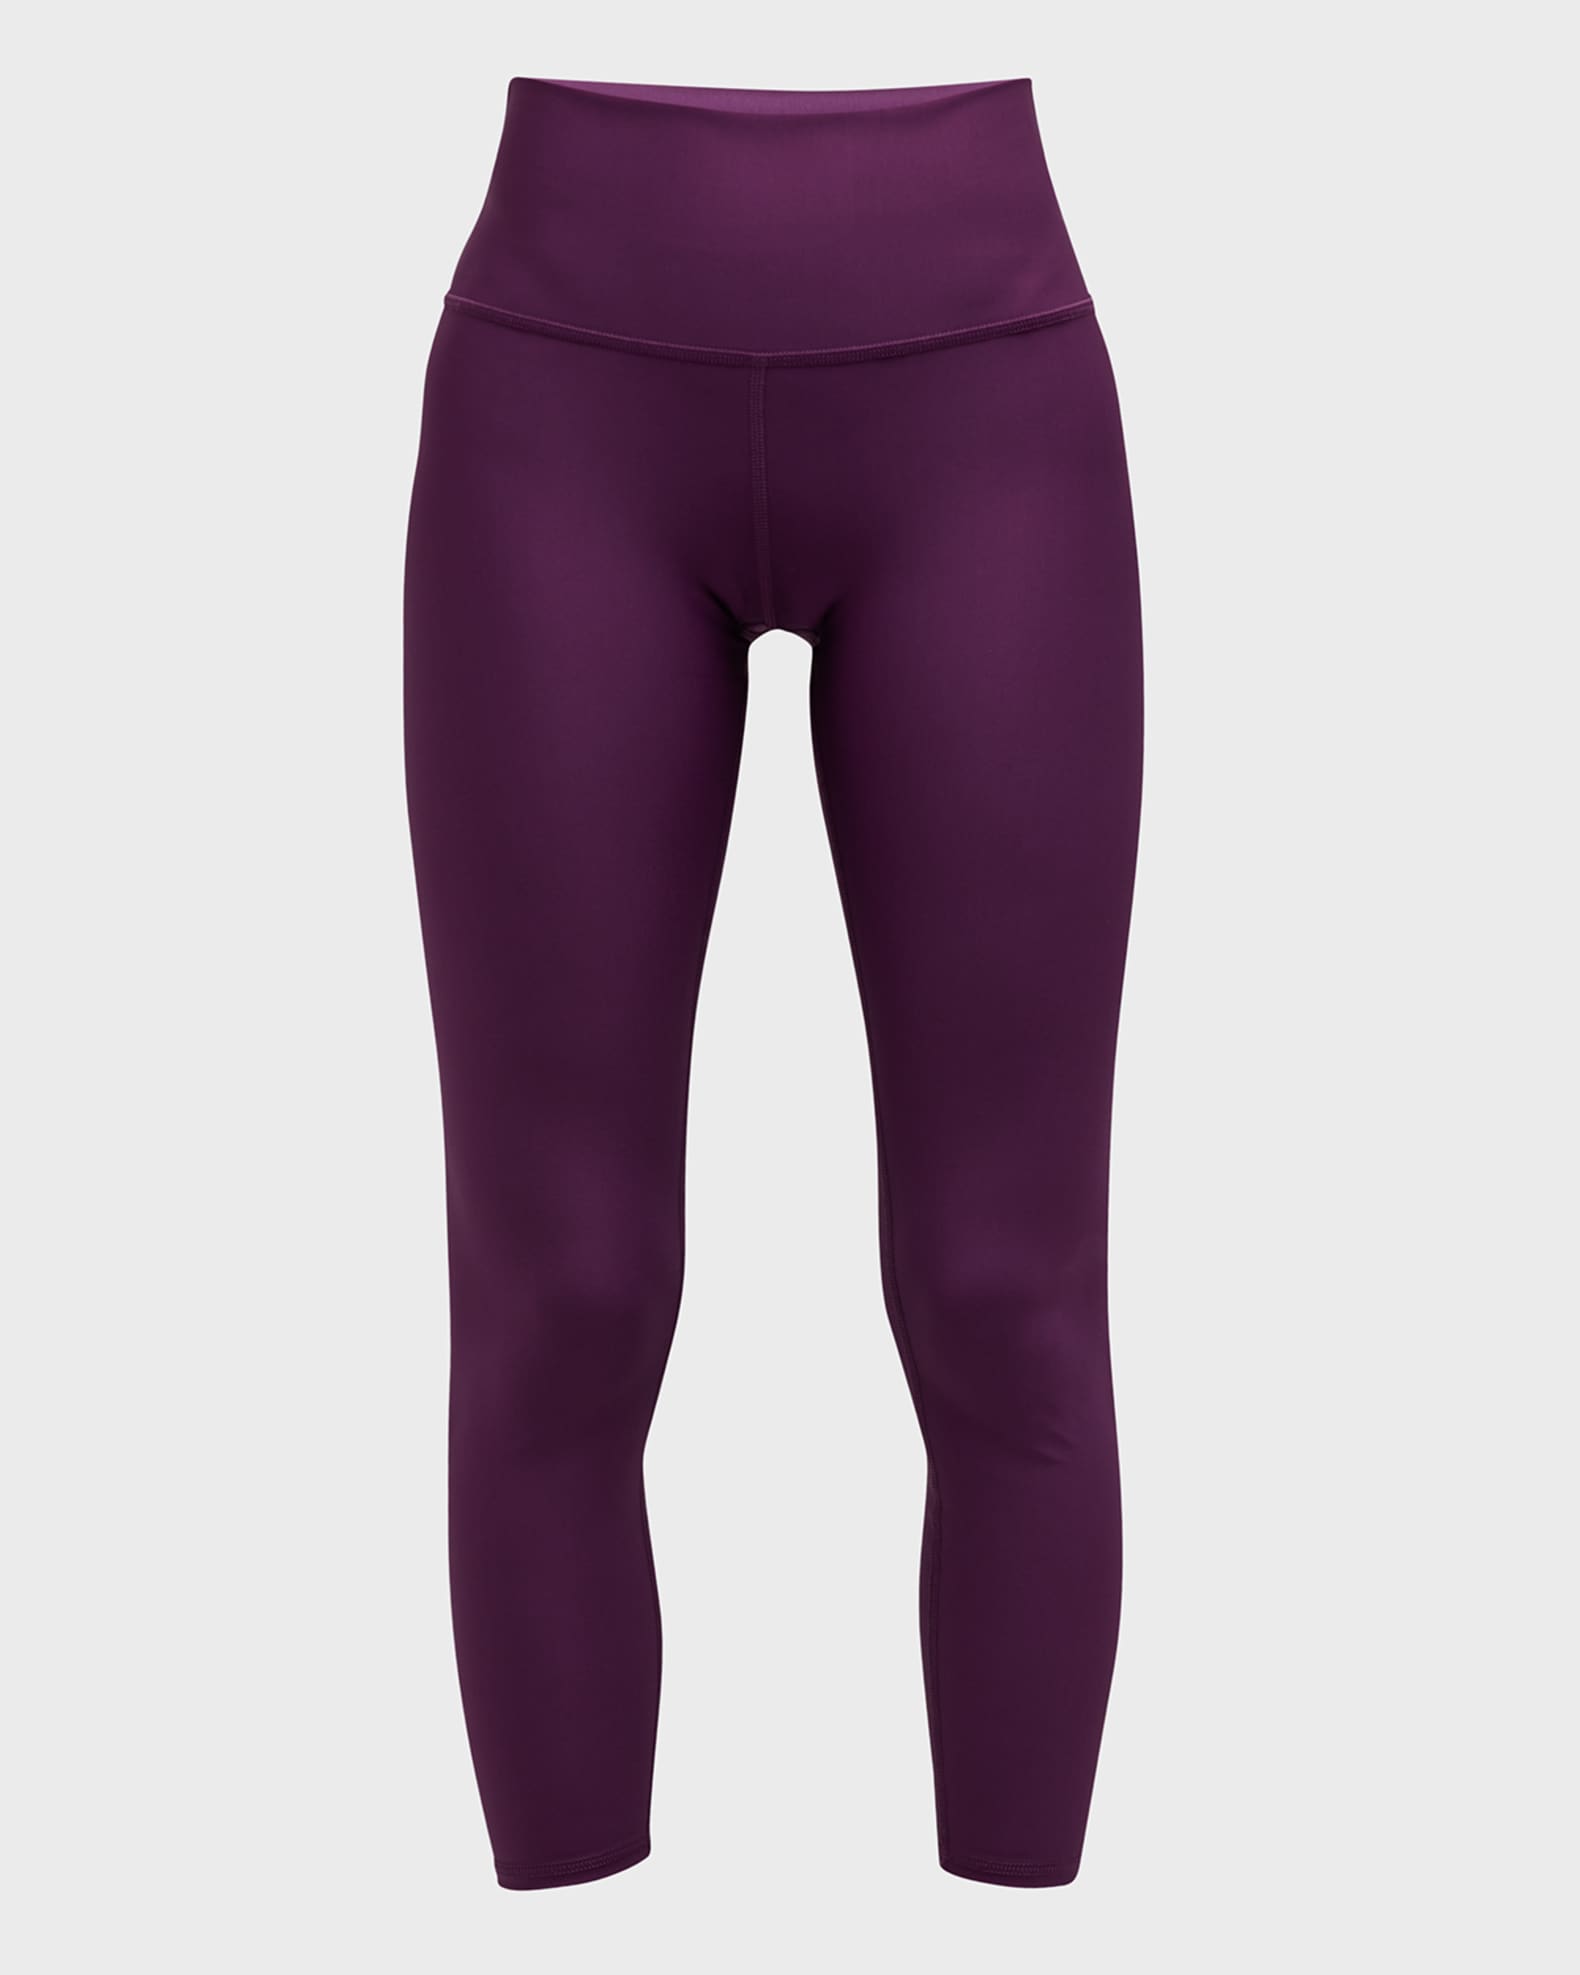 ALO 7/8 High-Waist Airlift Legging in electric violet size small